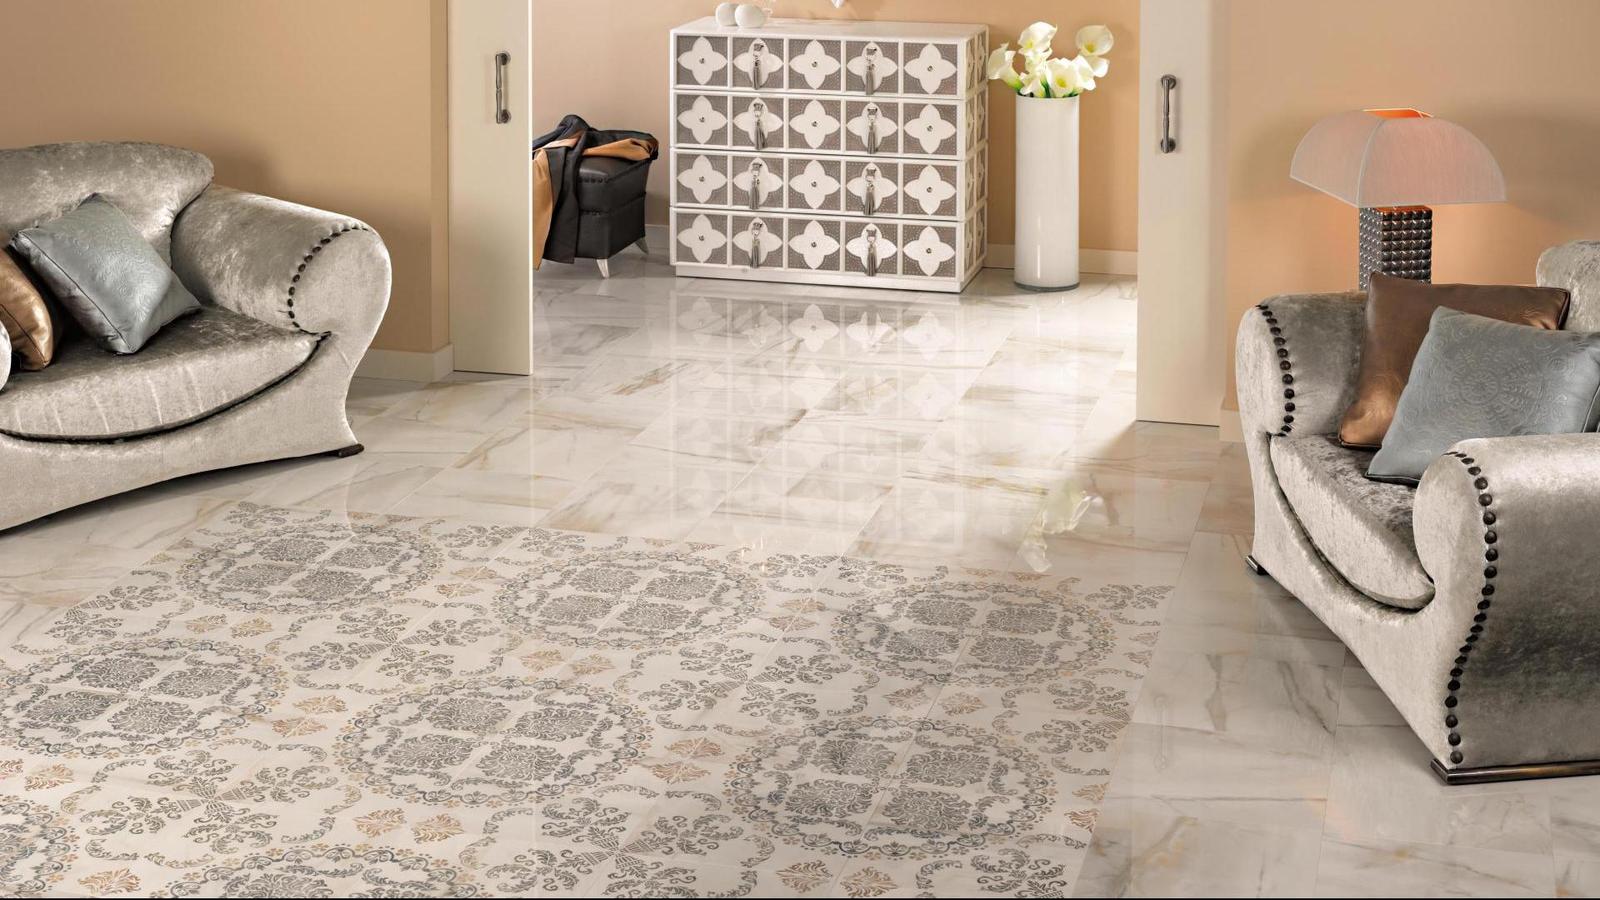 25 Beautiful Tile Flooring Ideas for Living Room, Kitchen ...